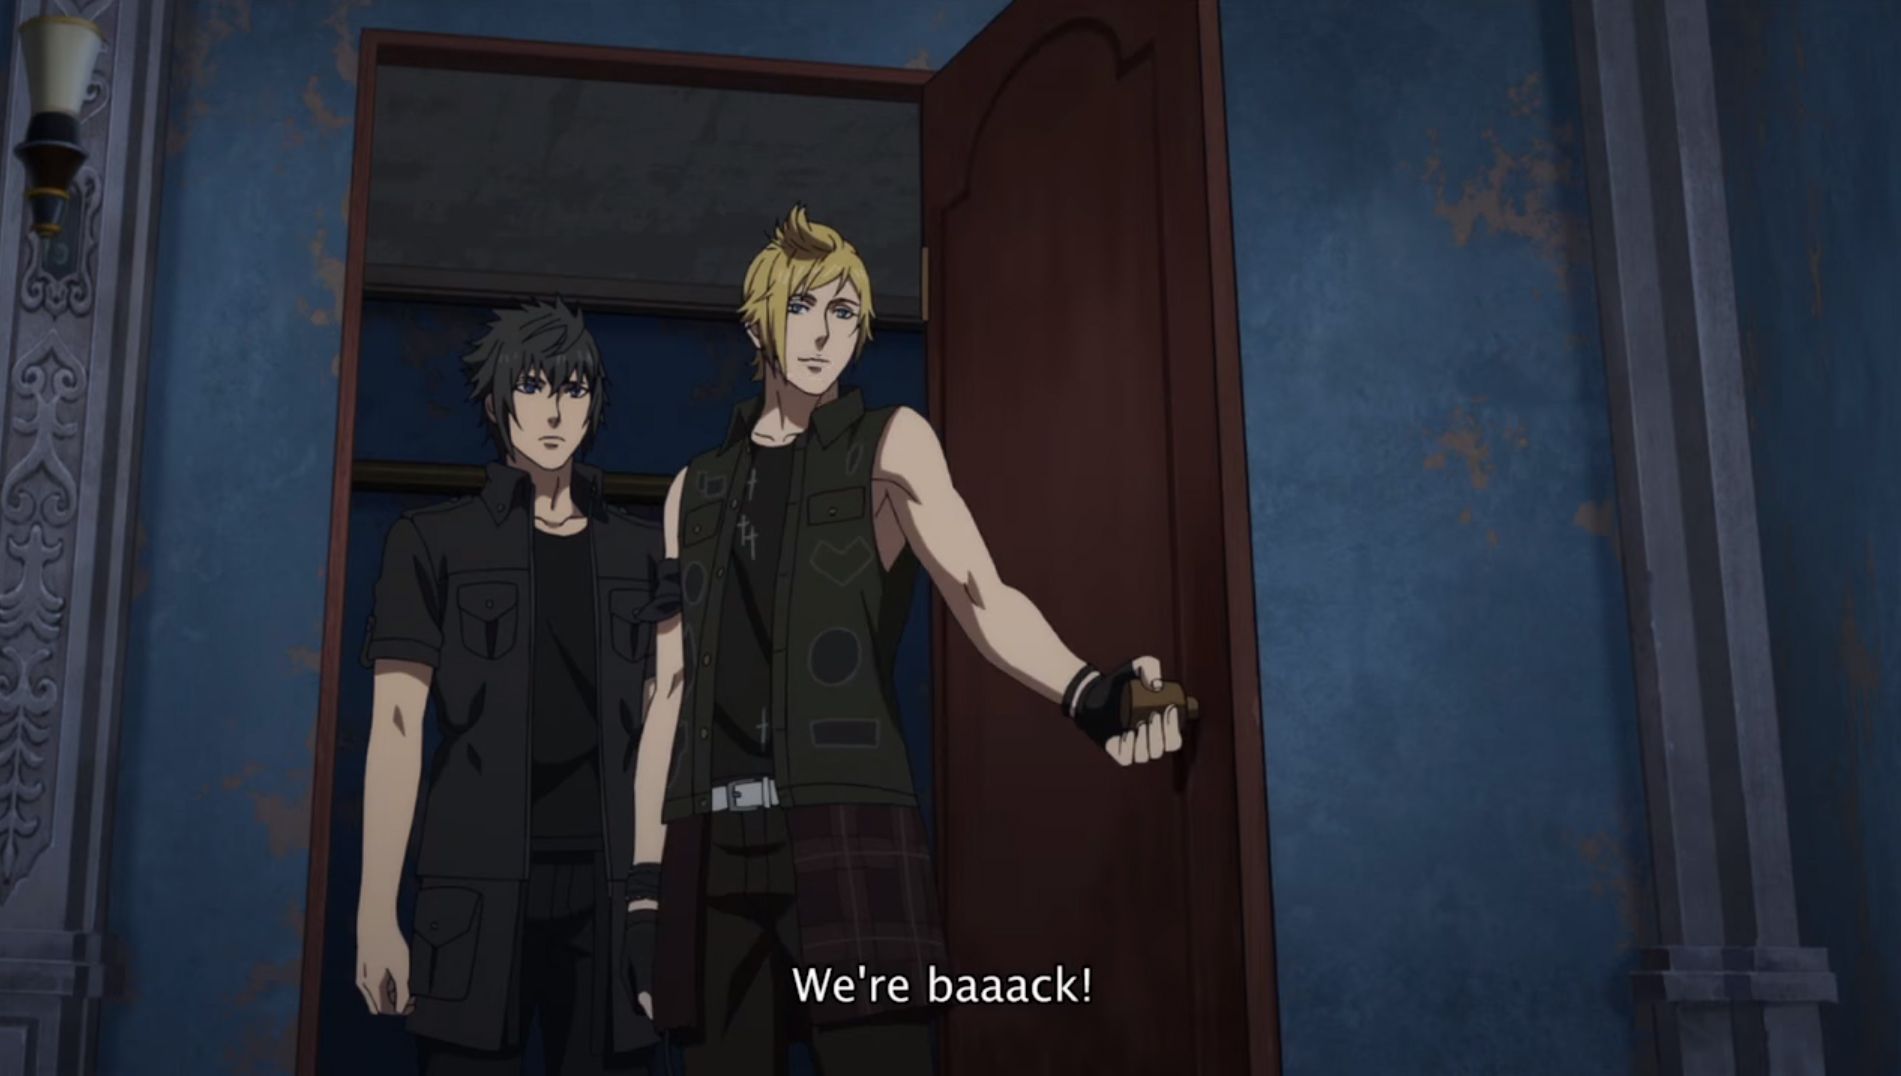 Watch All Episodes of Brotherhood: Final Fantasy XV, Including